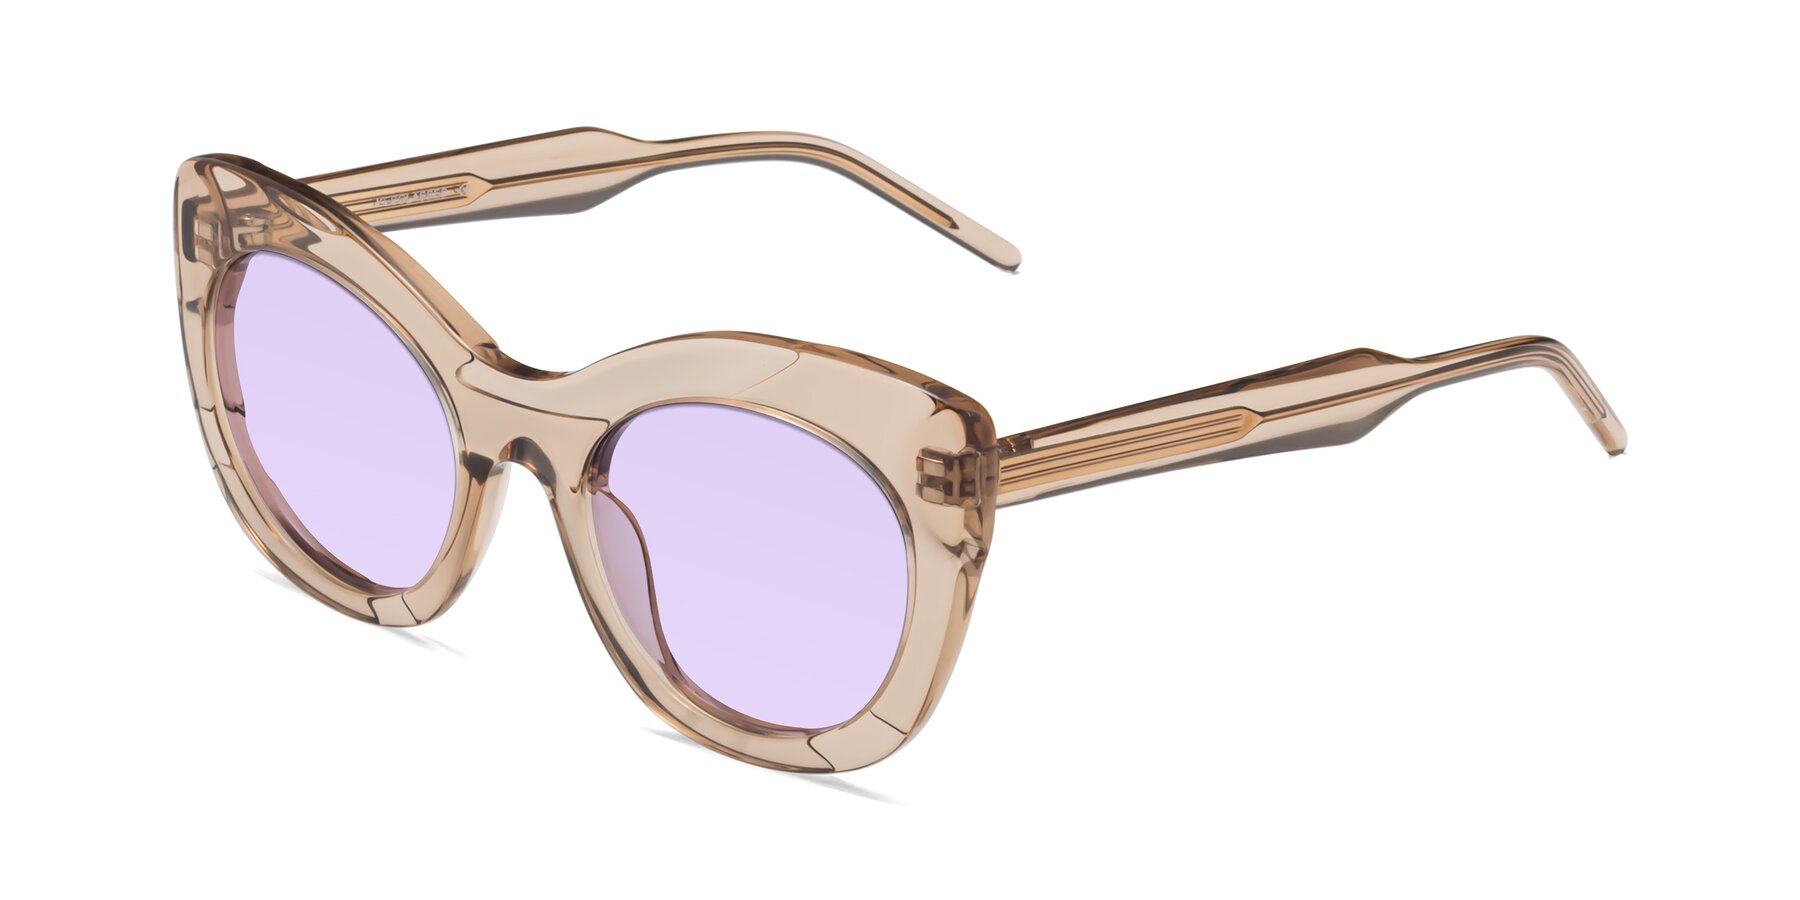 Angle of 1547 in Caramel with Light Purple Tinted Lenses